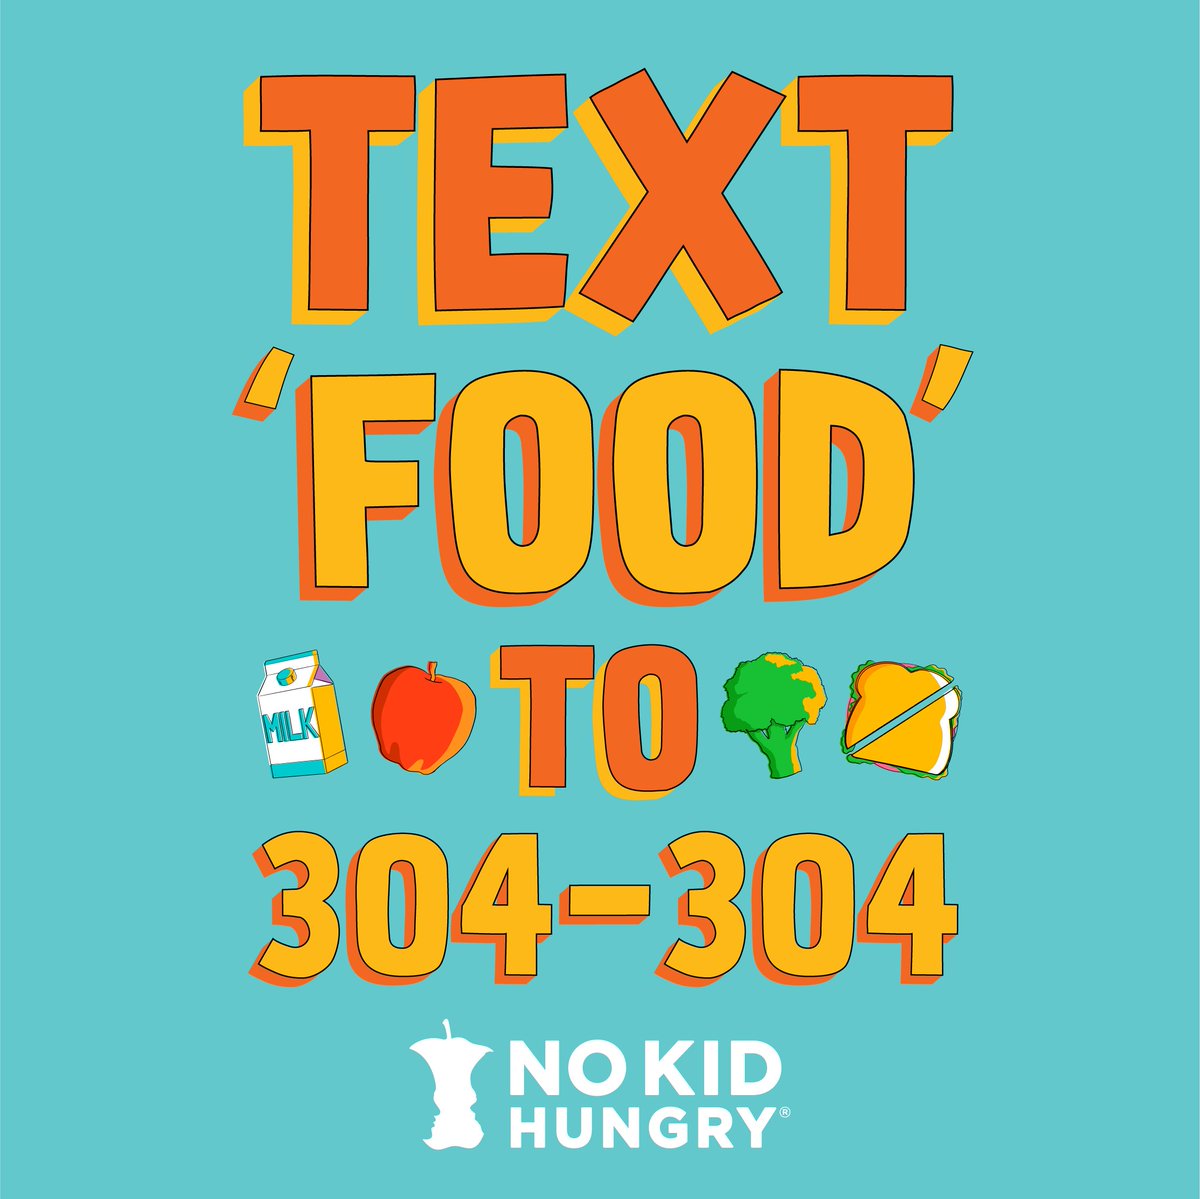 FREE SUMMER MEALS FOR KIDS 🧡🙌

Test FOOD or COMIDA to 304-304 for info from #nokidhungry #sharesummer #summermeals